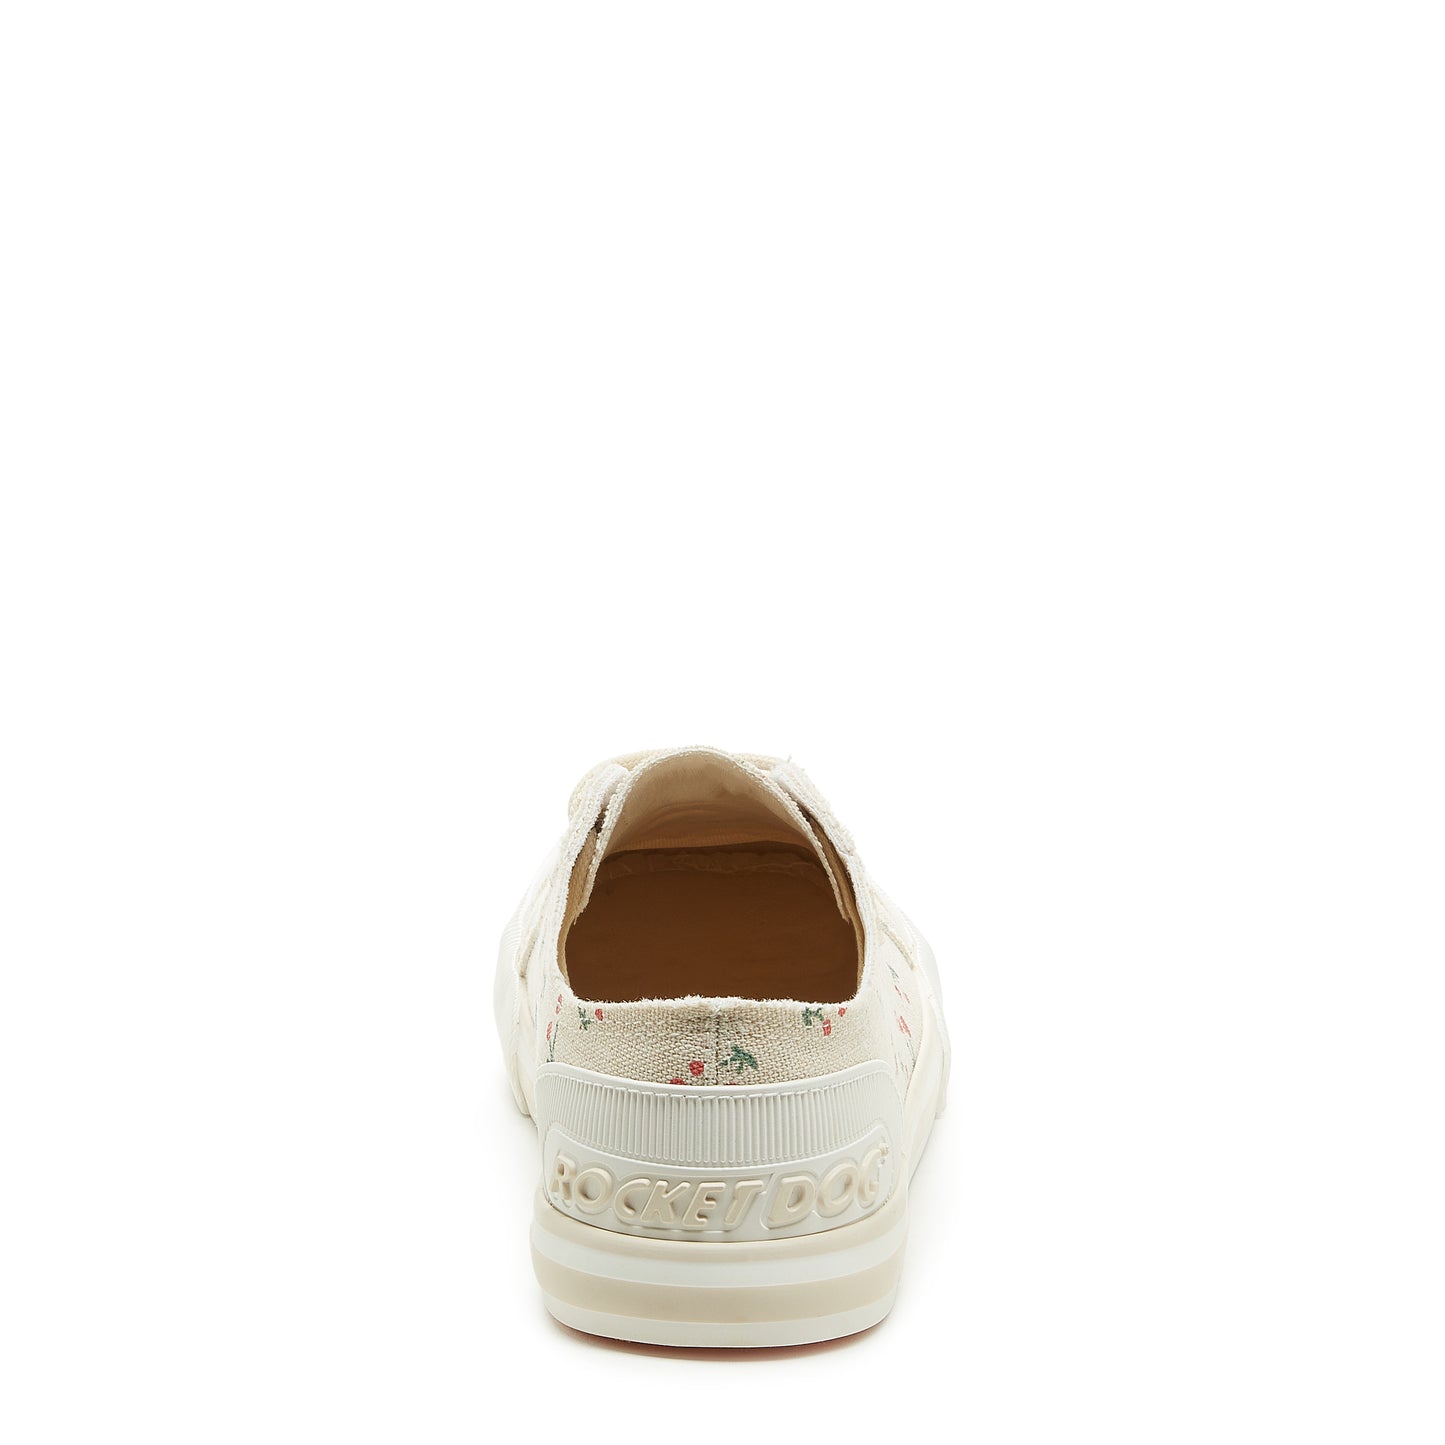 Jazzin Recycled Cotton Cherry Print Trainers